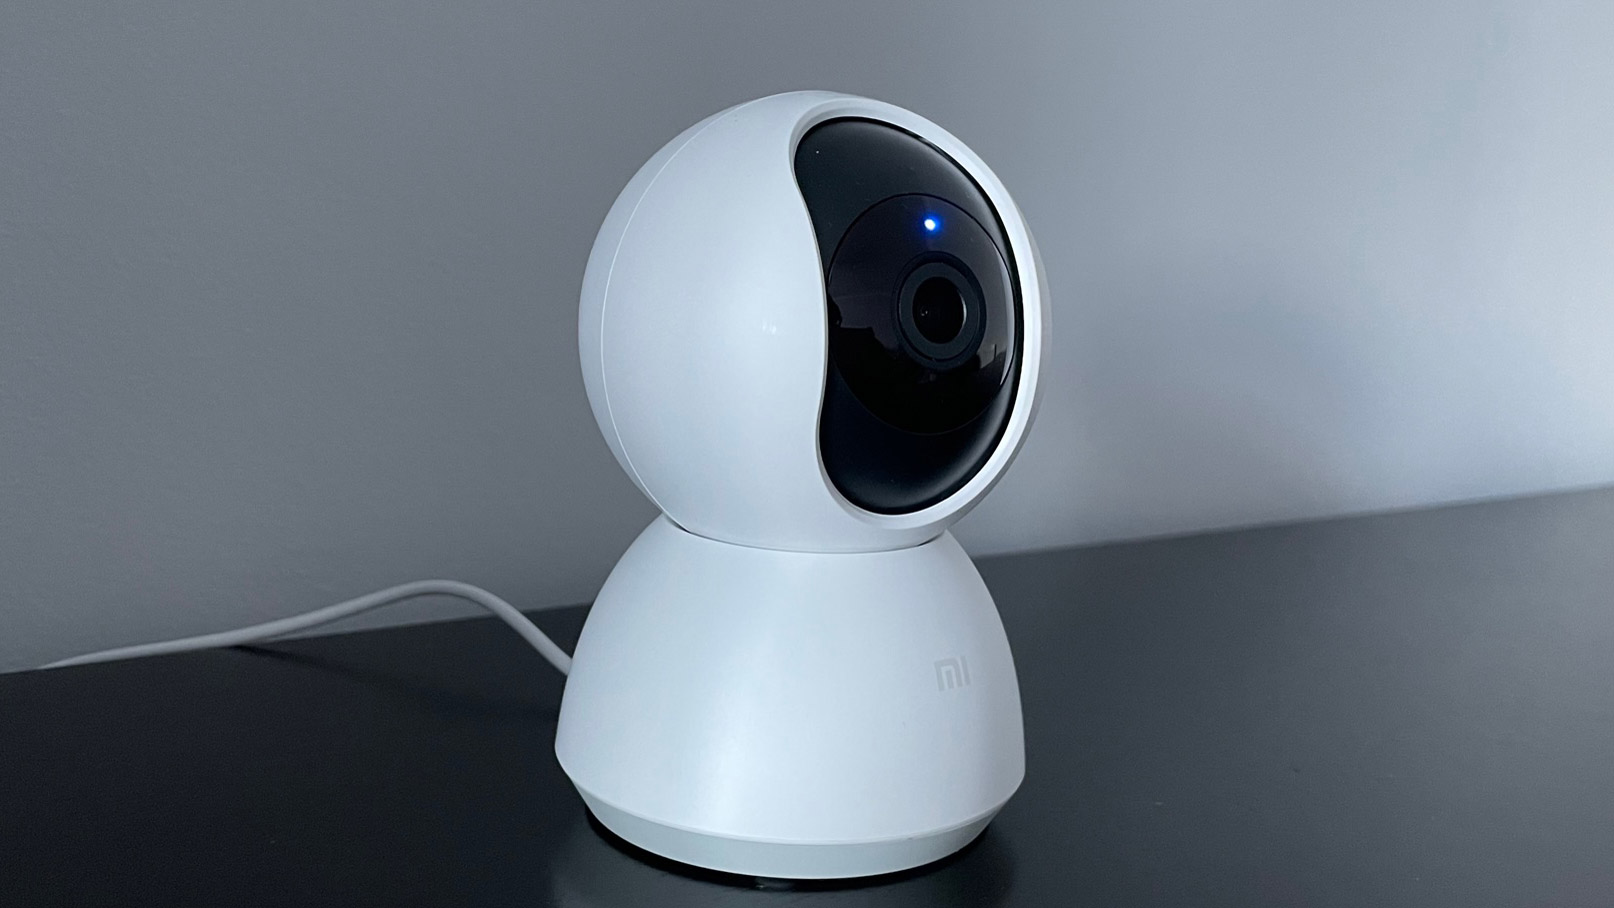 The side view of the Xiaomi Mi Home Security Camera 360